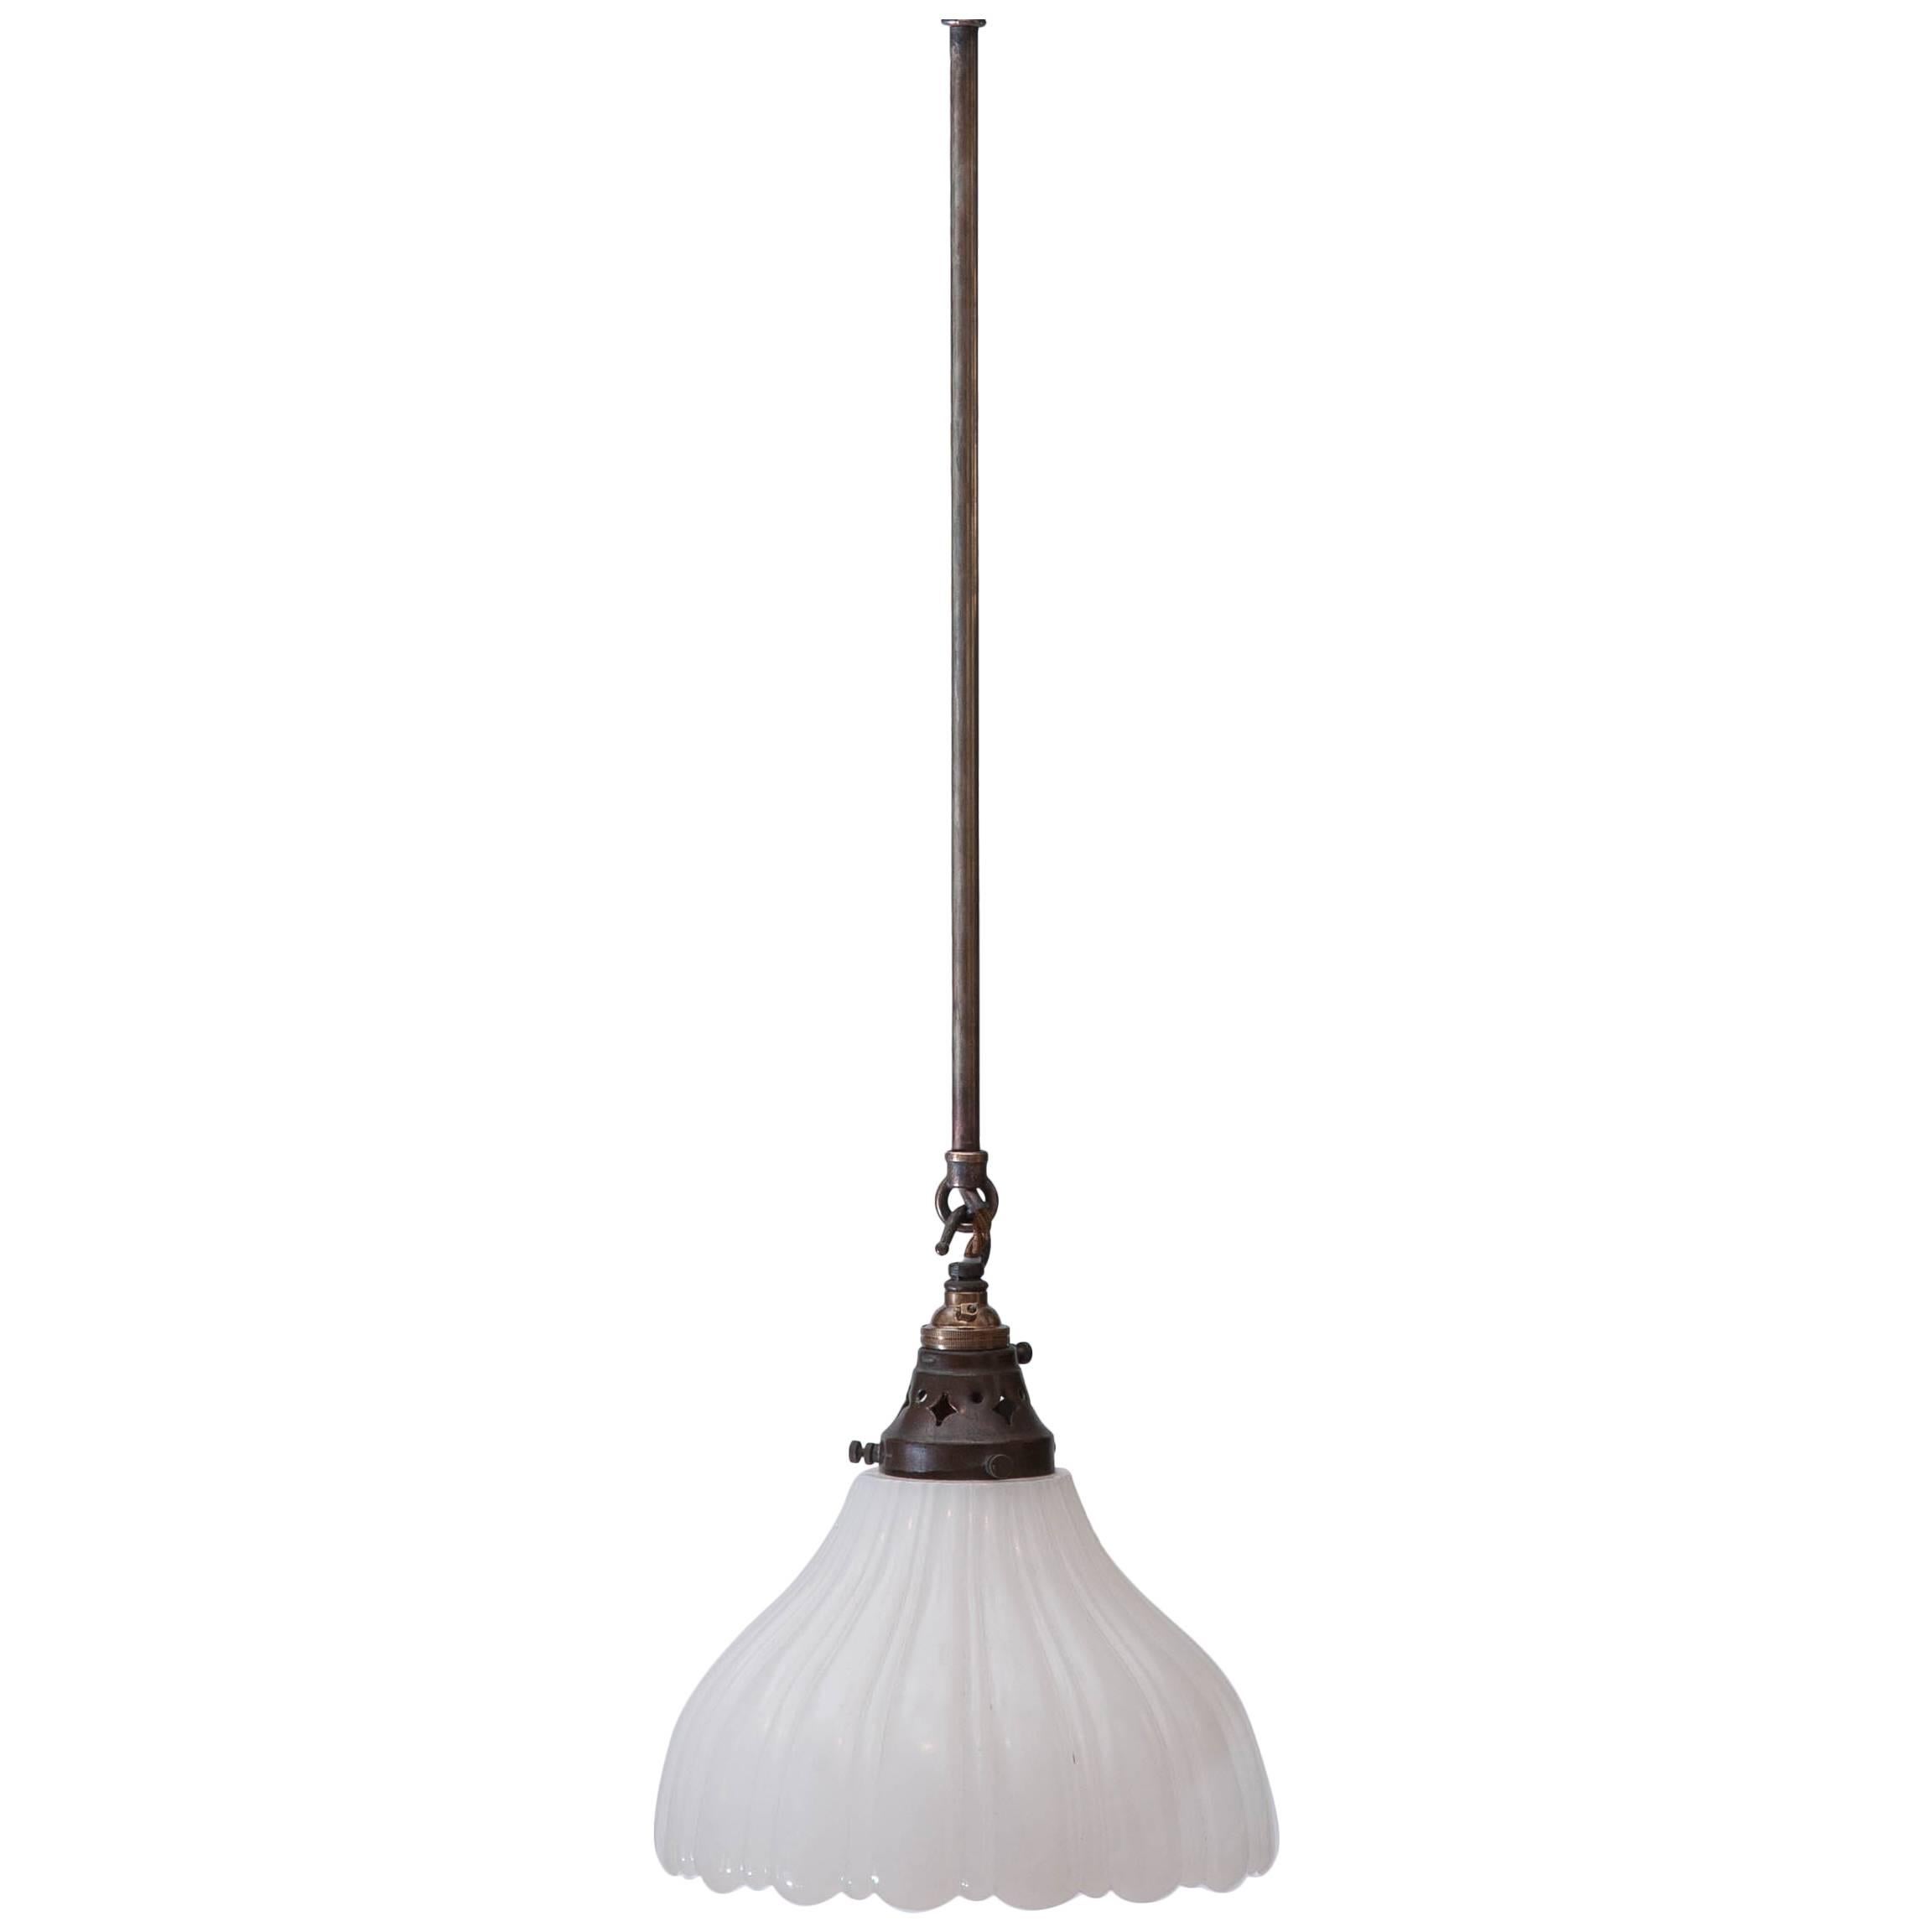 English Milk Glass Shade Hanging Light, Late 19th Century For Sale